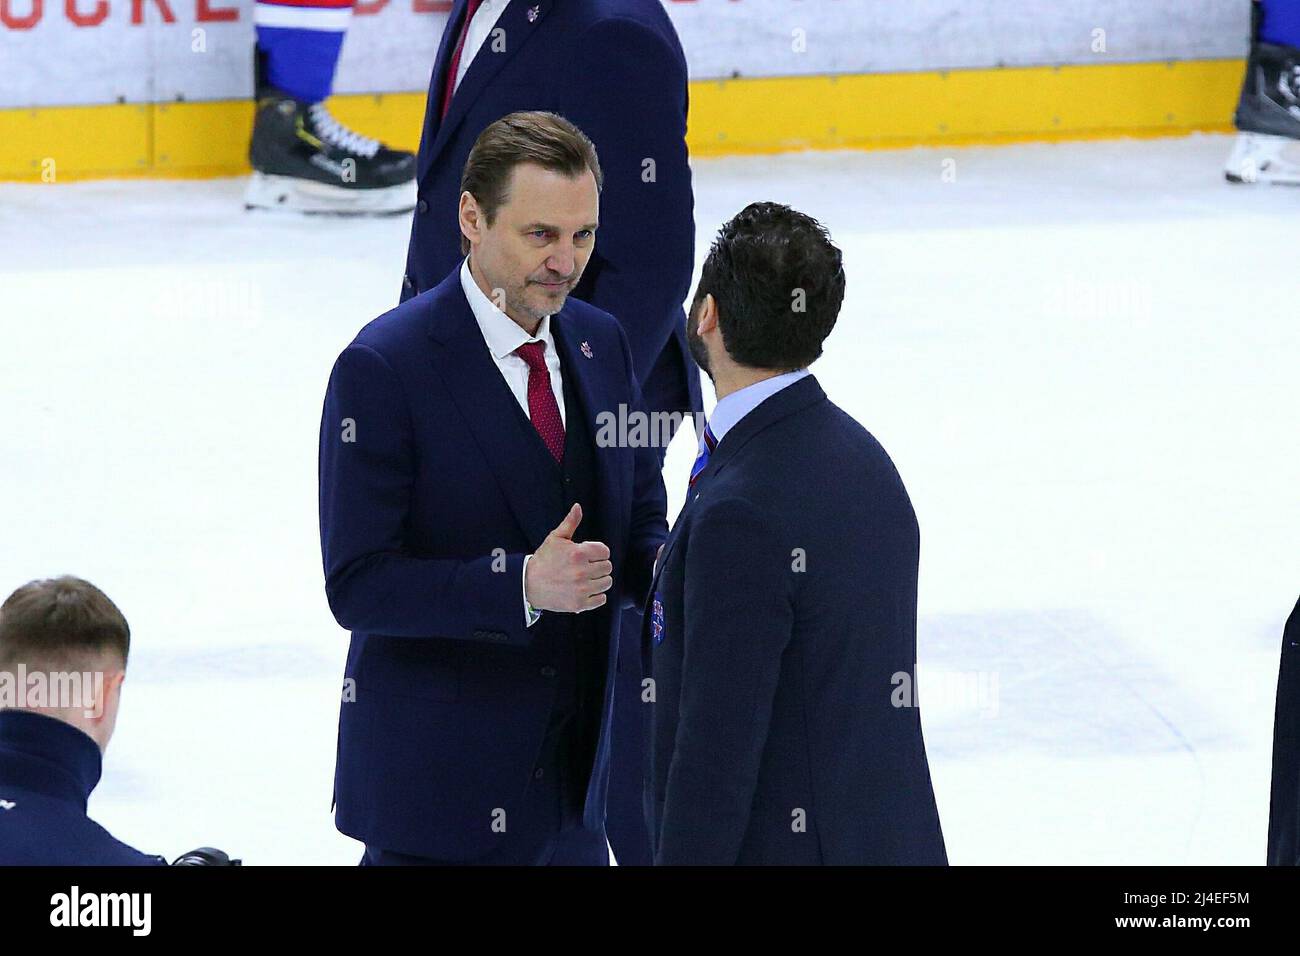 Saint Petersburg, Russia. 10th Apr, 2023. Sergei Fedorov, head coach of the  CSKA hockey club speaks at a press conference after the match of the  Kontinental Hockey League, Gagarin Cup, match 5